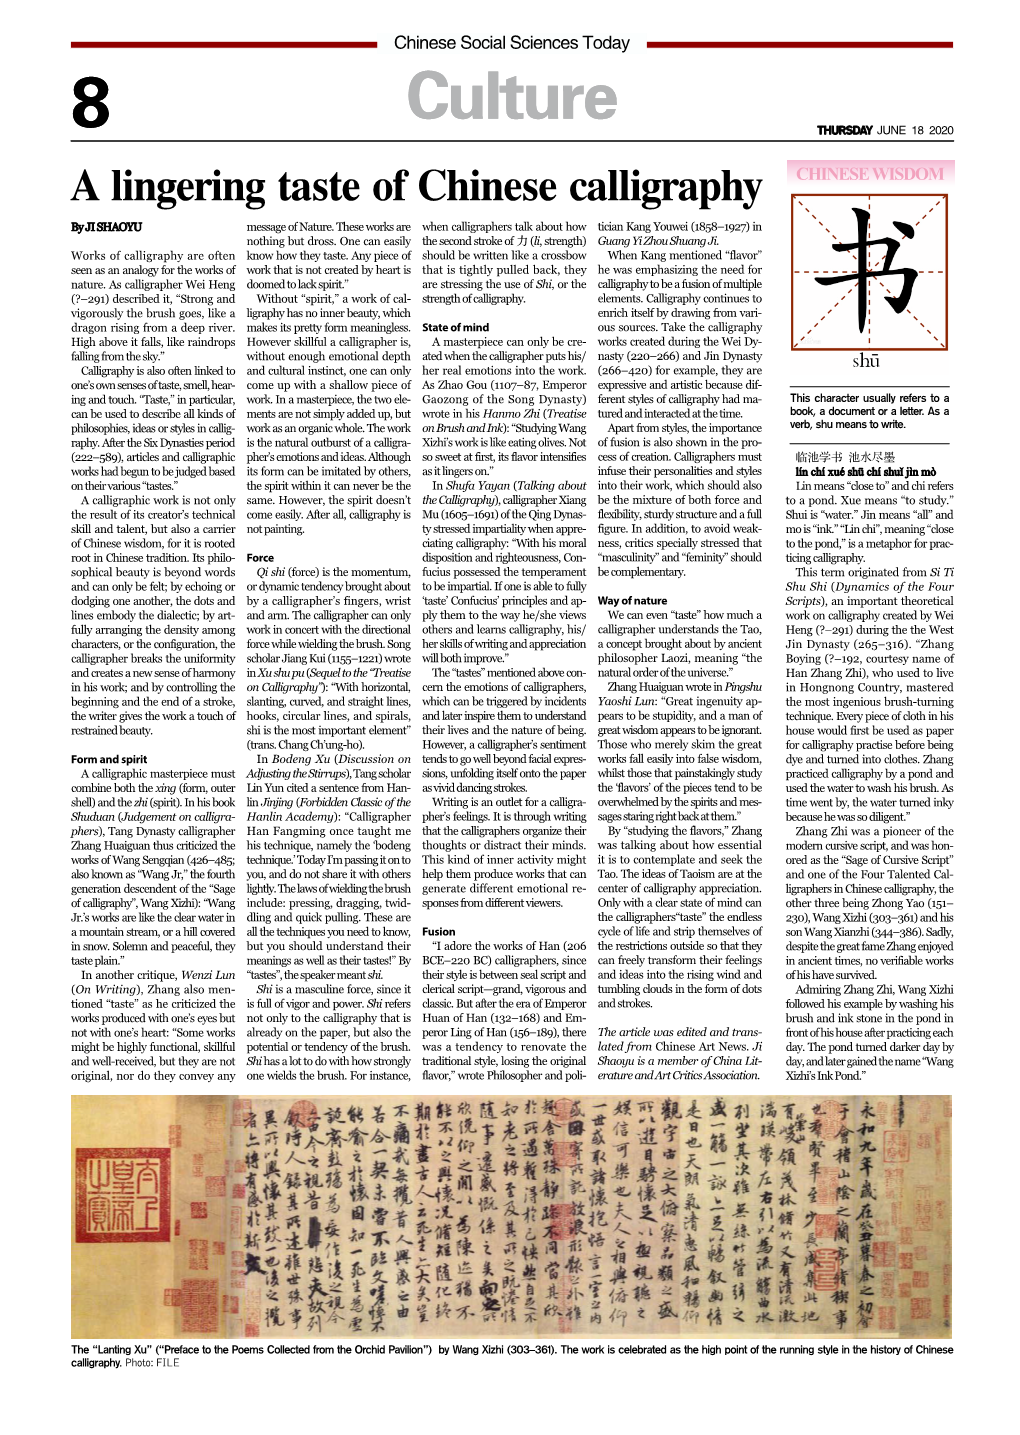 A Lingering Taste of Chinese Calligraphy CHINESE WISDOM